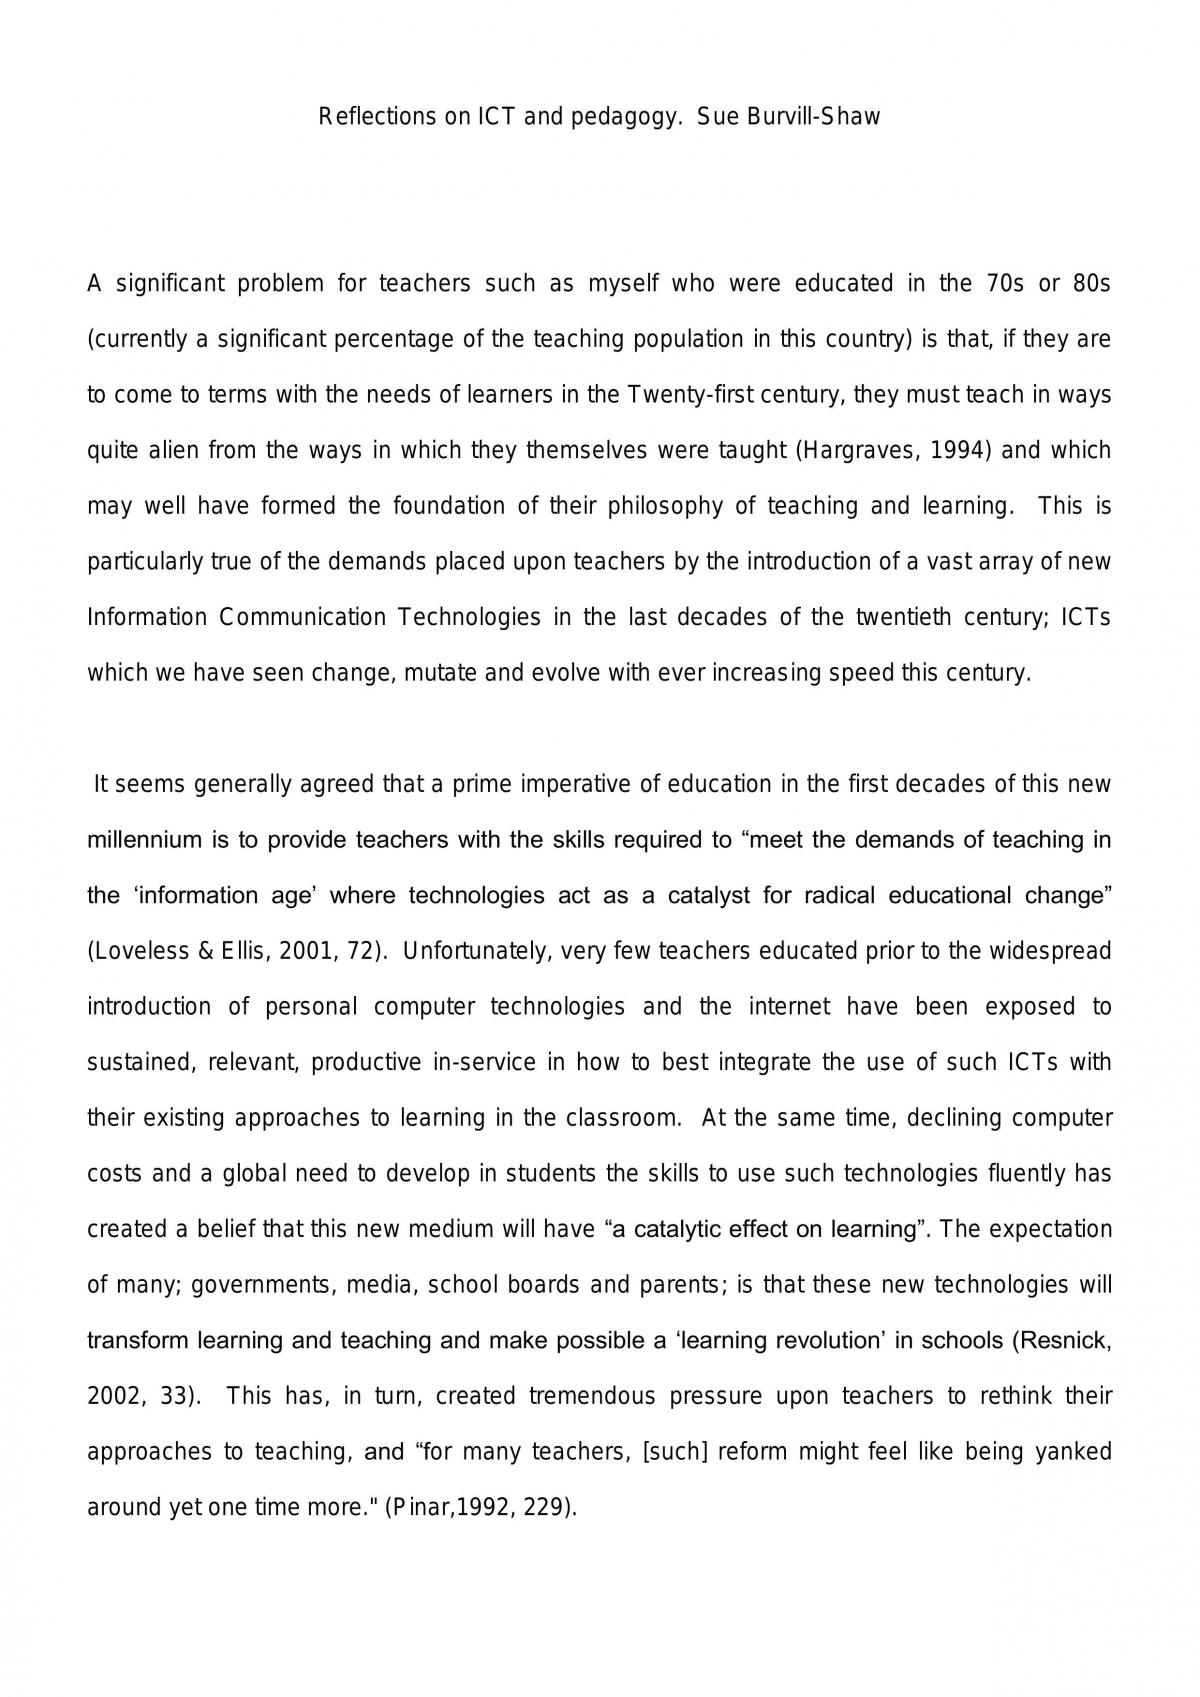 Reflections on ICT and Pedagogy - Page 1